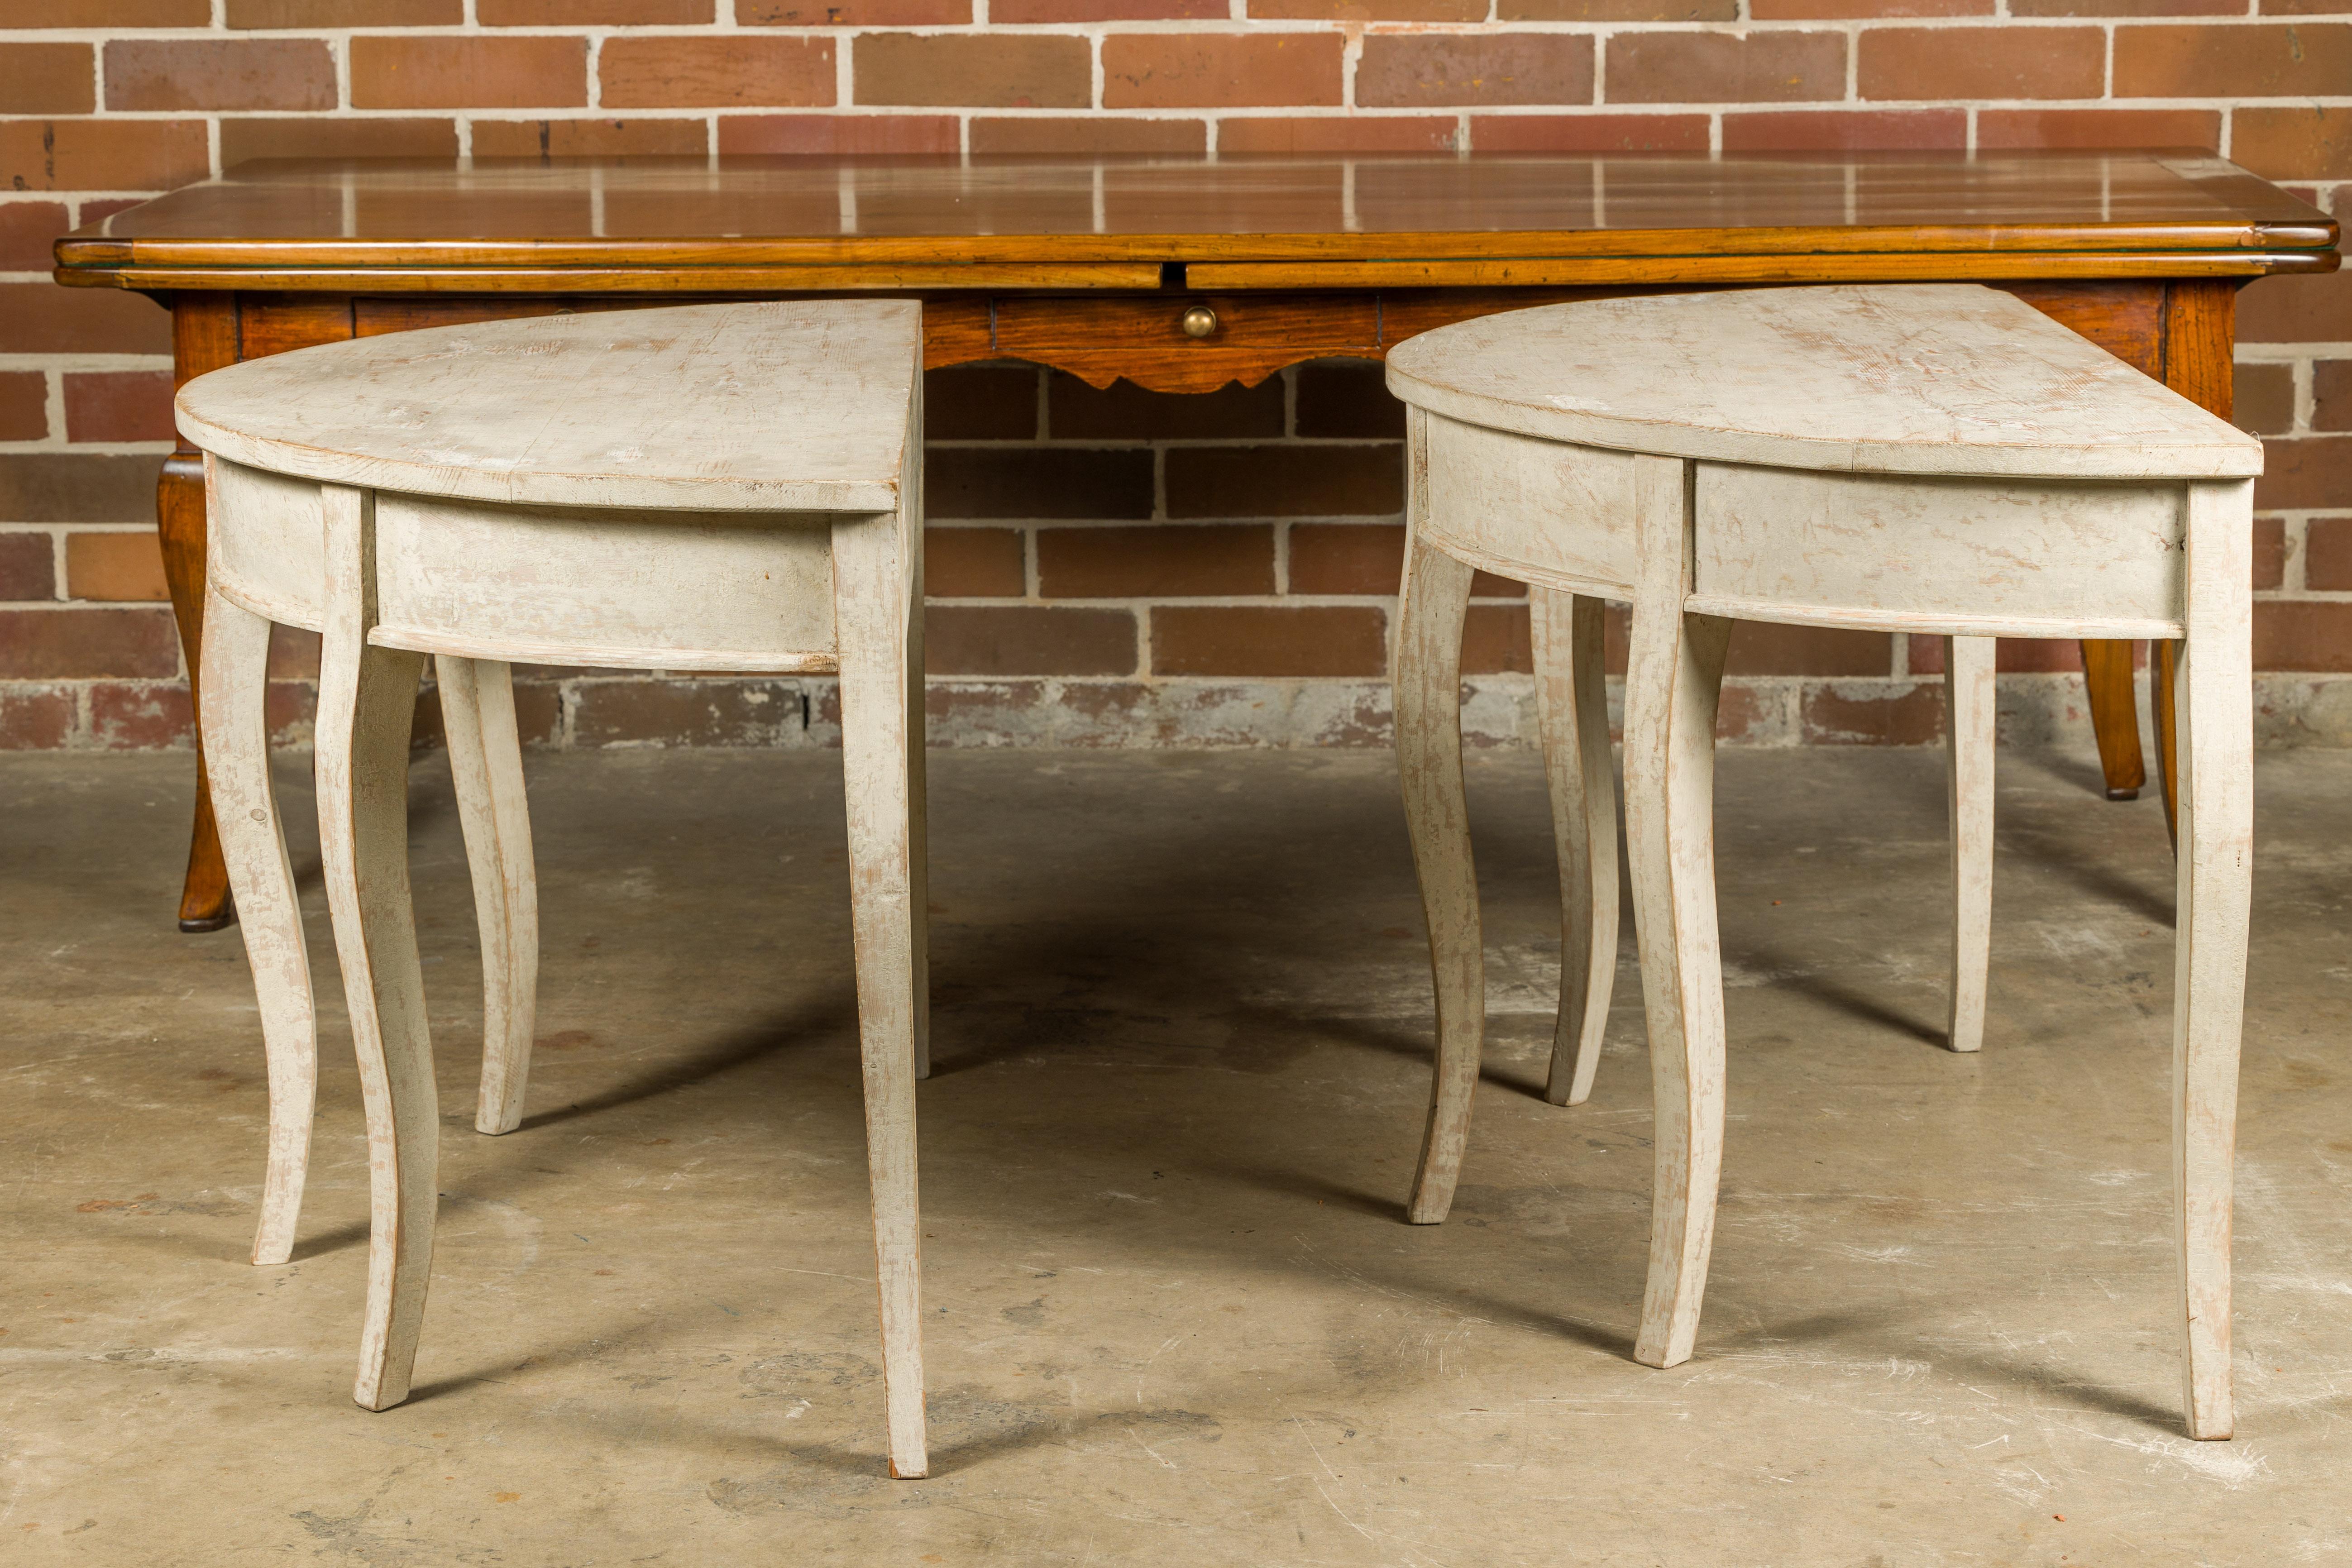 Swedish 19th Century Painted Demilune Tables with Cabriole Legs, a Pair For Sale 12